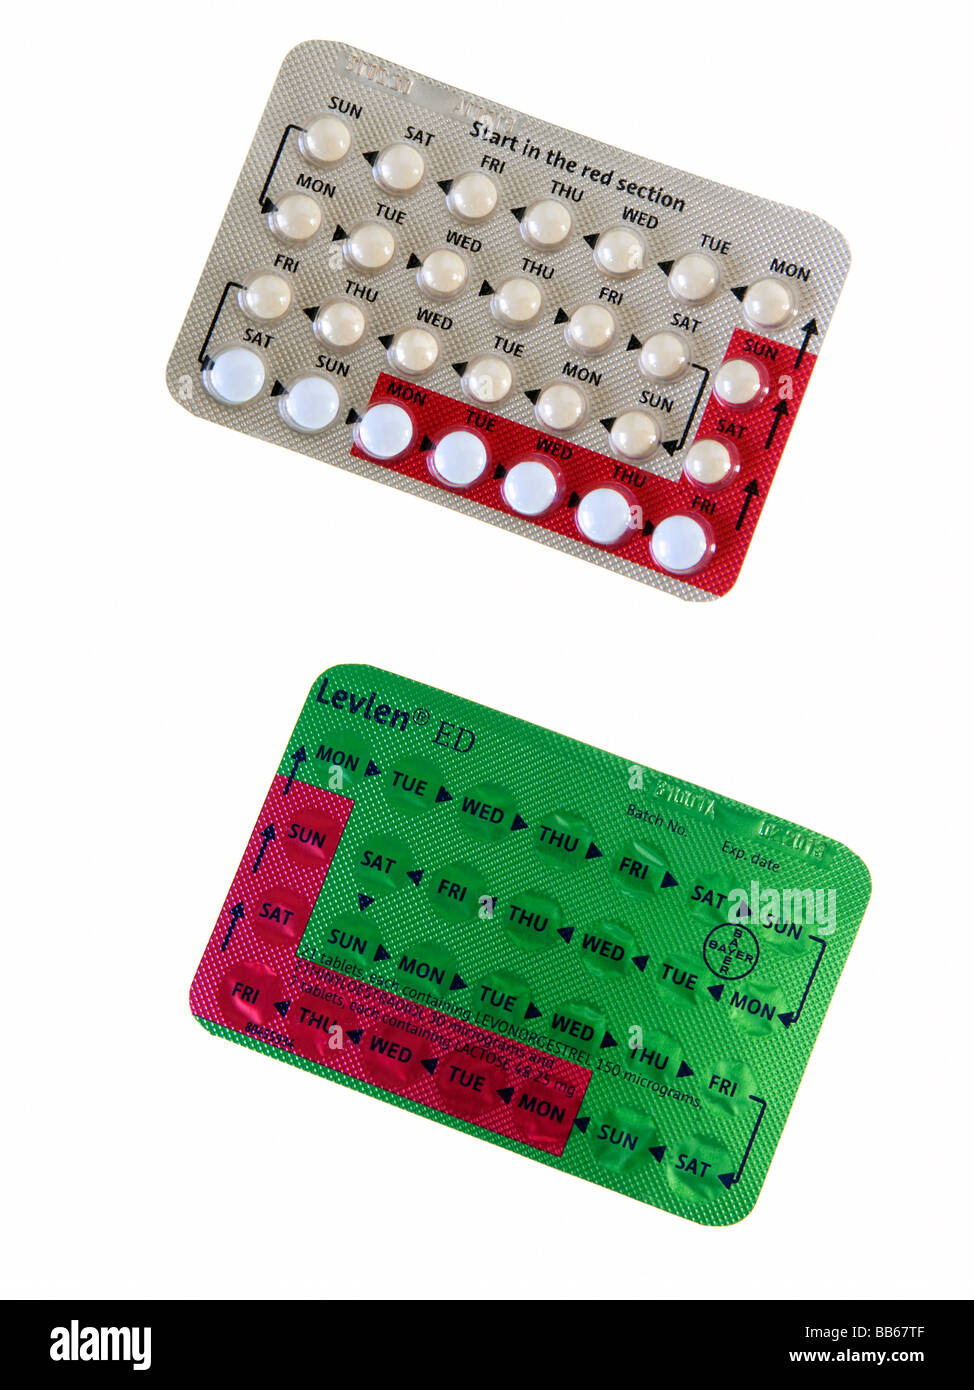 The front and back of a packet of contraceptive pills Stock Photo